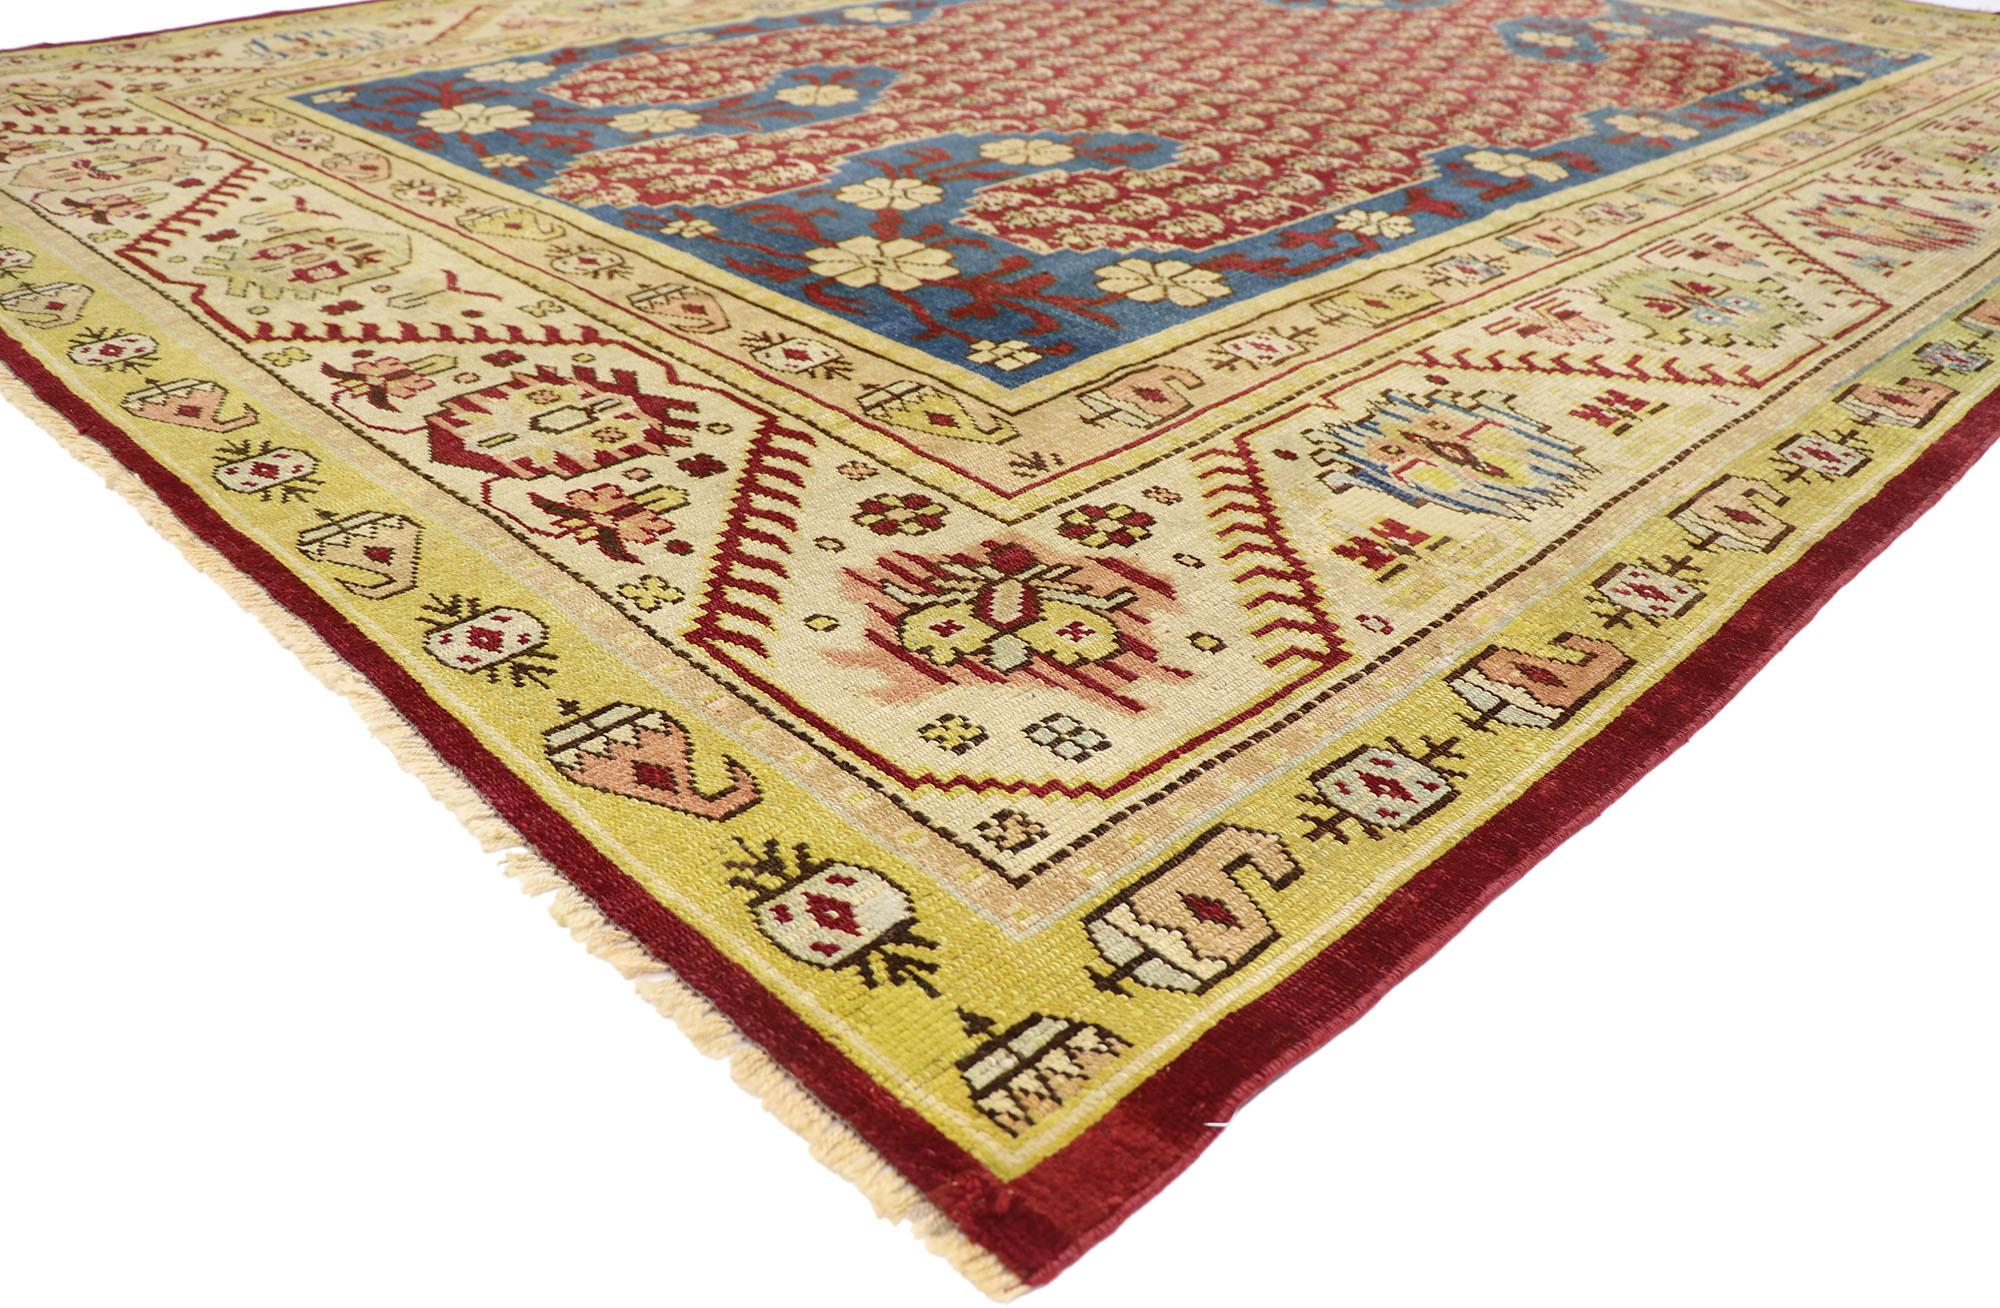 53563 Antique Turkish Oushak Rug, 09'05 x 12'11. In a mesmerizing display of intricate artistry, this antique Turkish Oushak rug beckons with its rich palette and tribal-inspired design. At its heart lies a bold red figurative pelt motif, a symbol